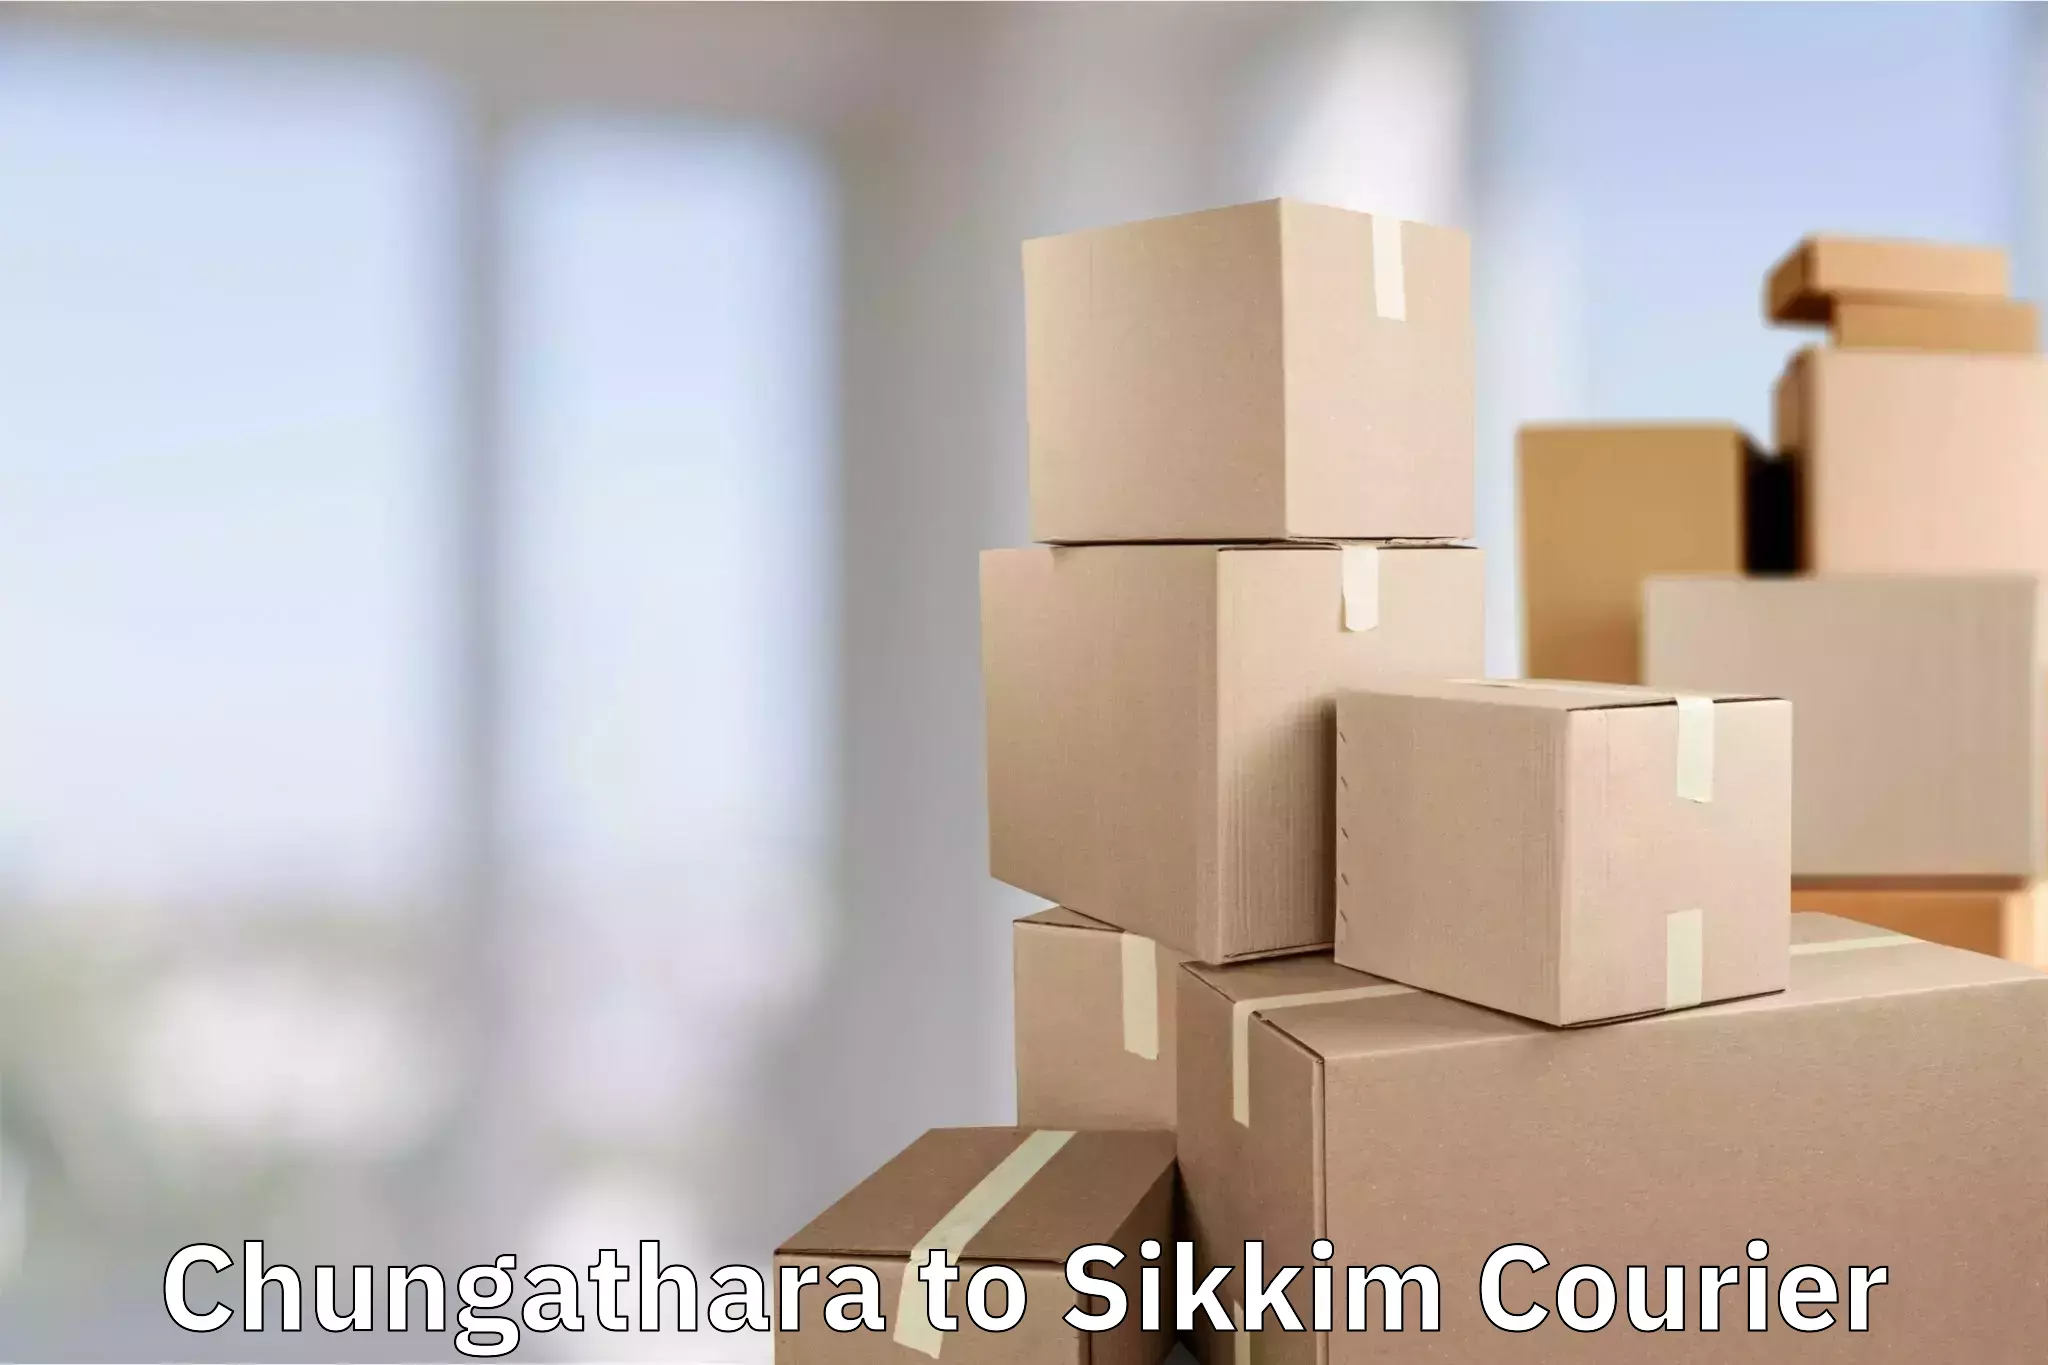 Online luggage shipping booking Chungathara to Sikkim